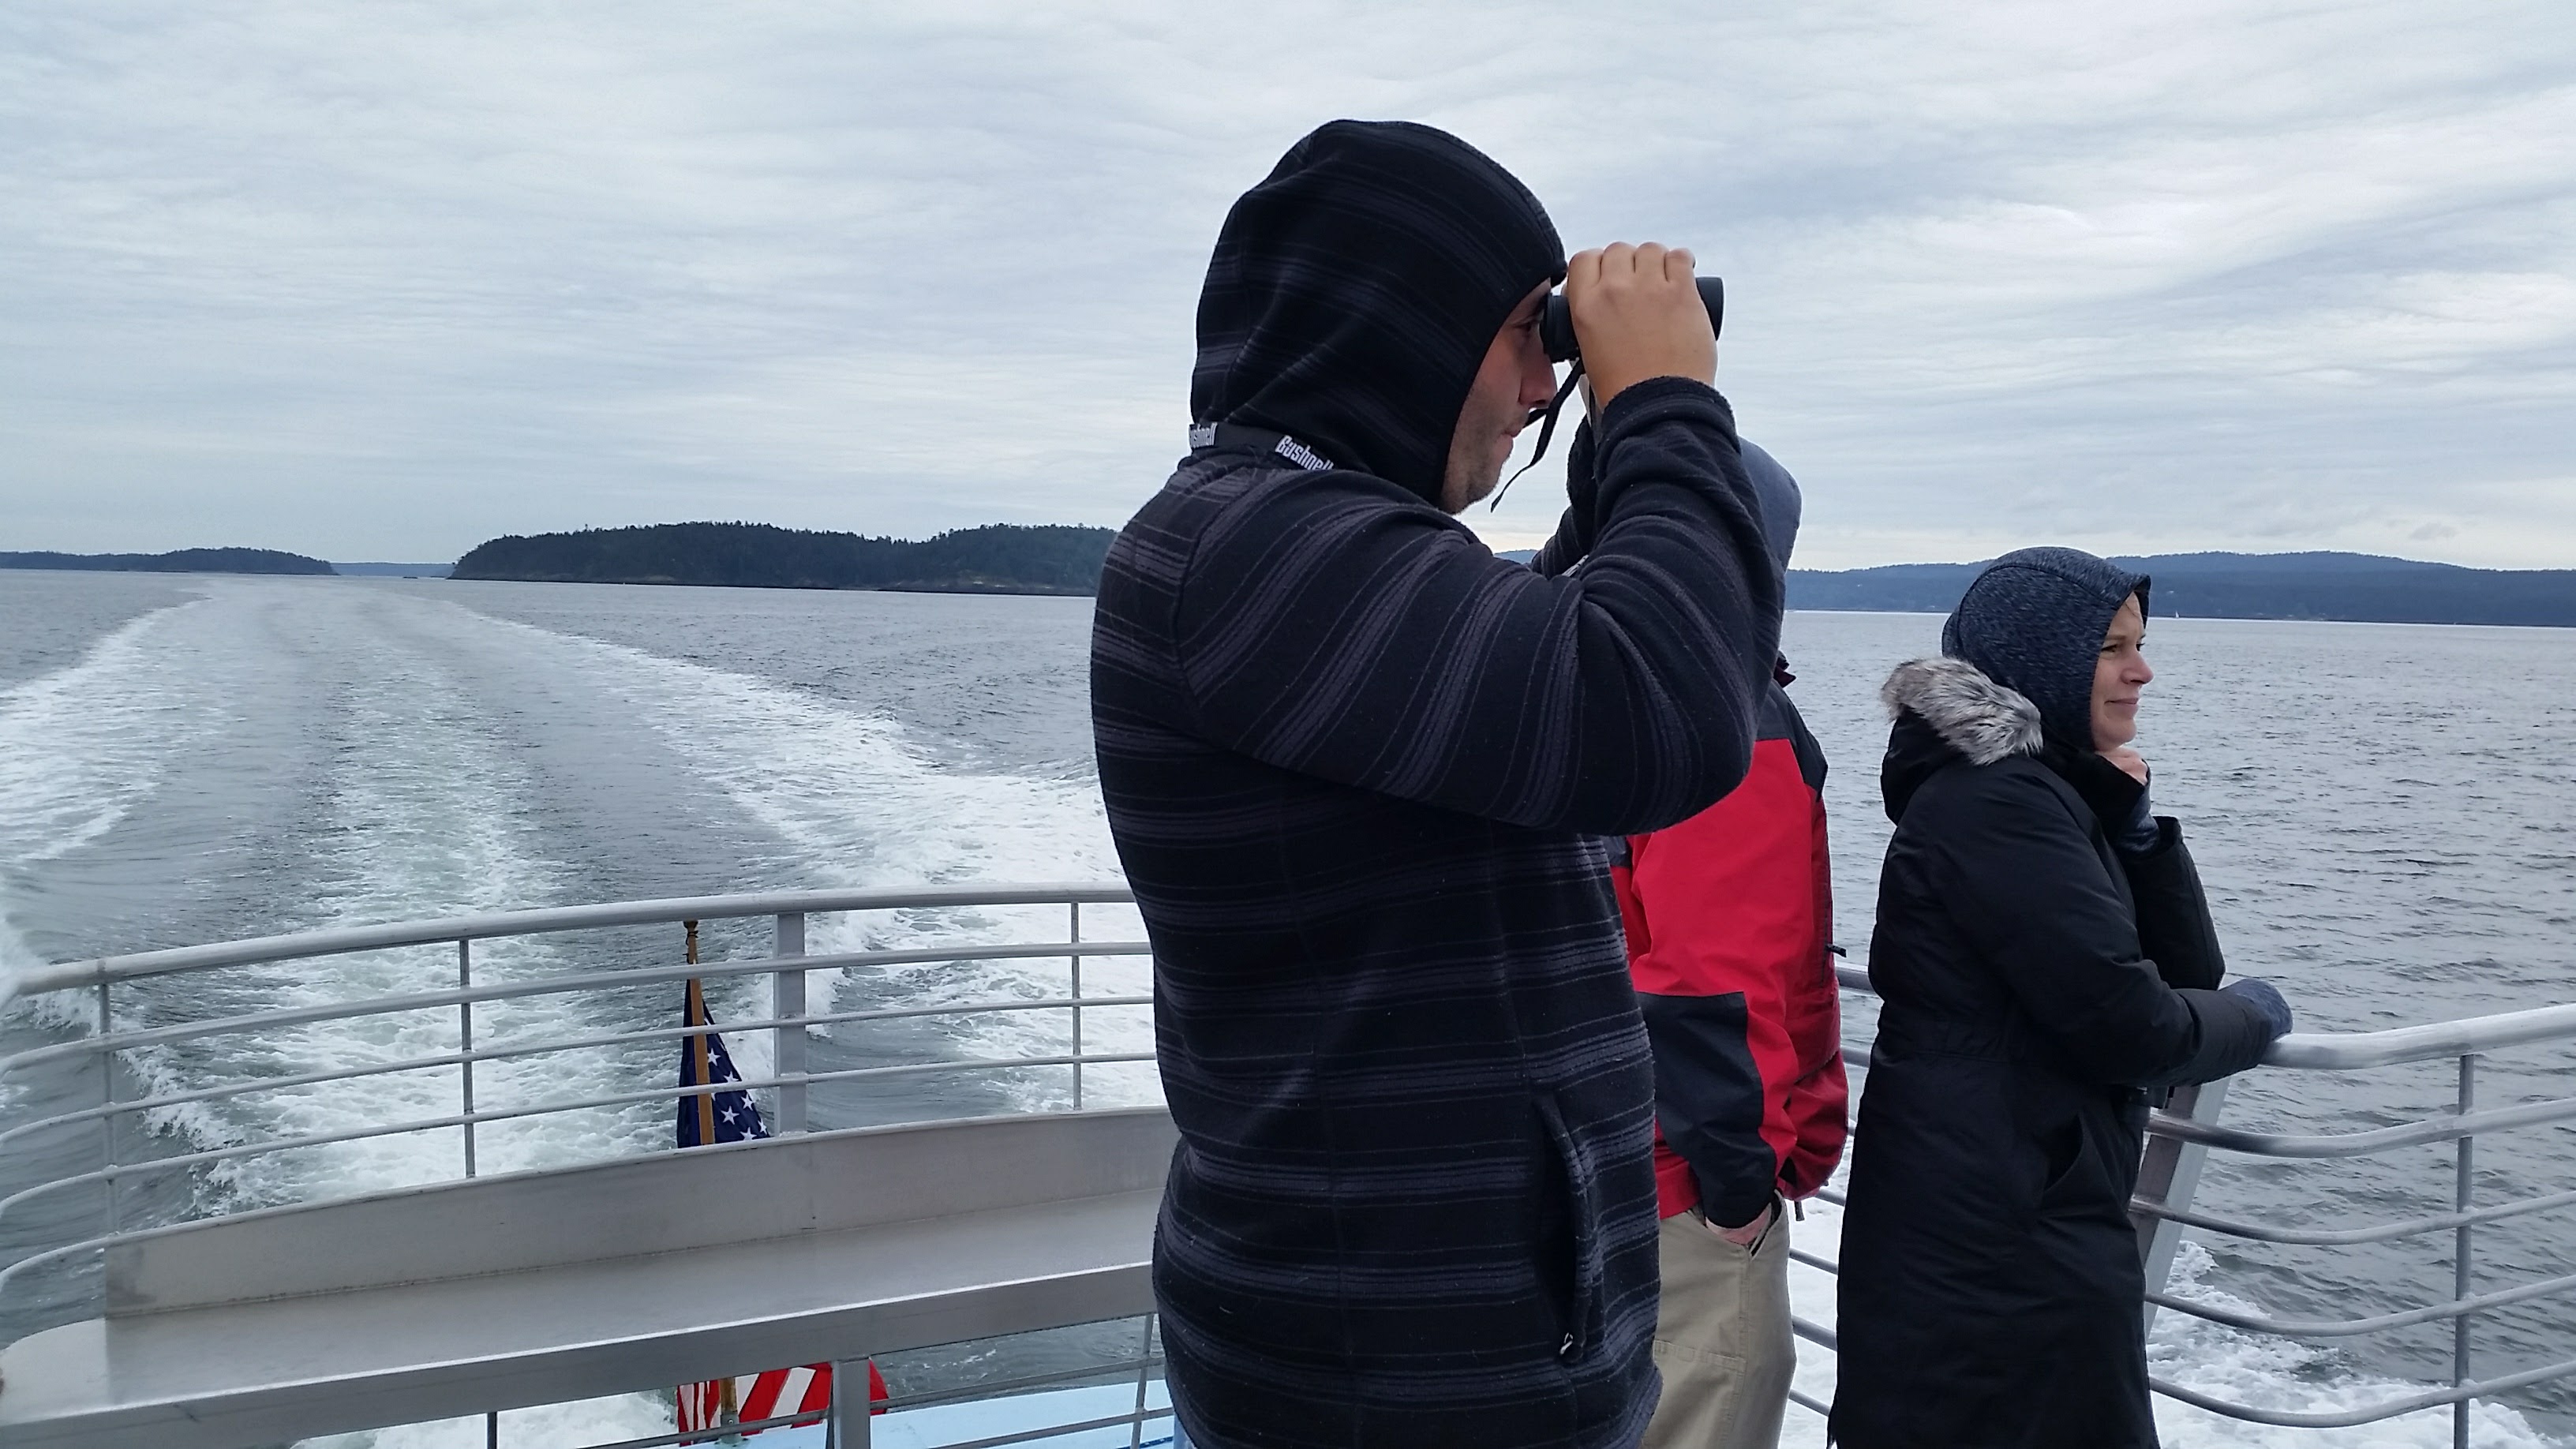 My husband using binoculars on the back of the whale watch boat looking for whales